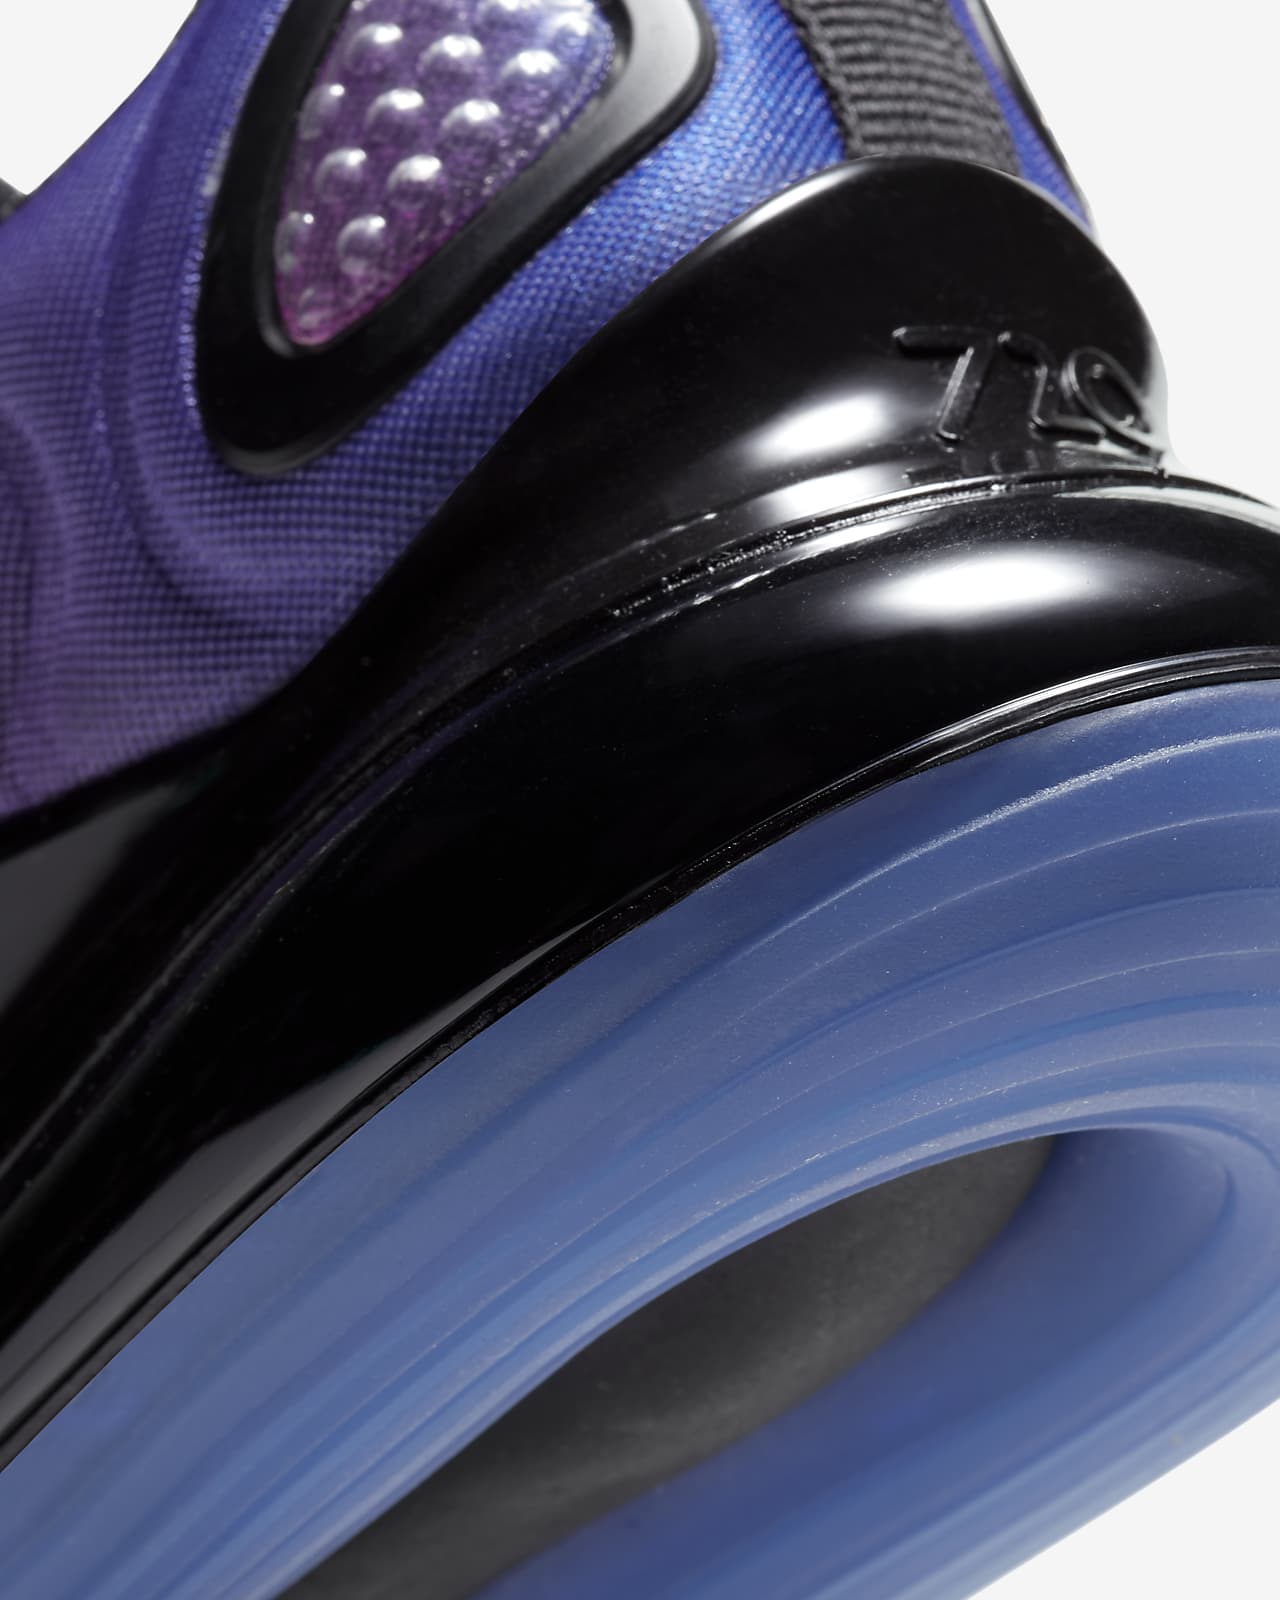 air max 720 purple and blue